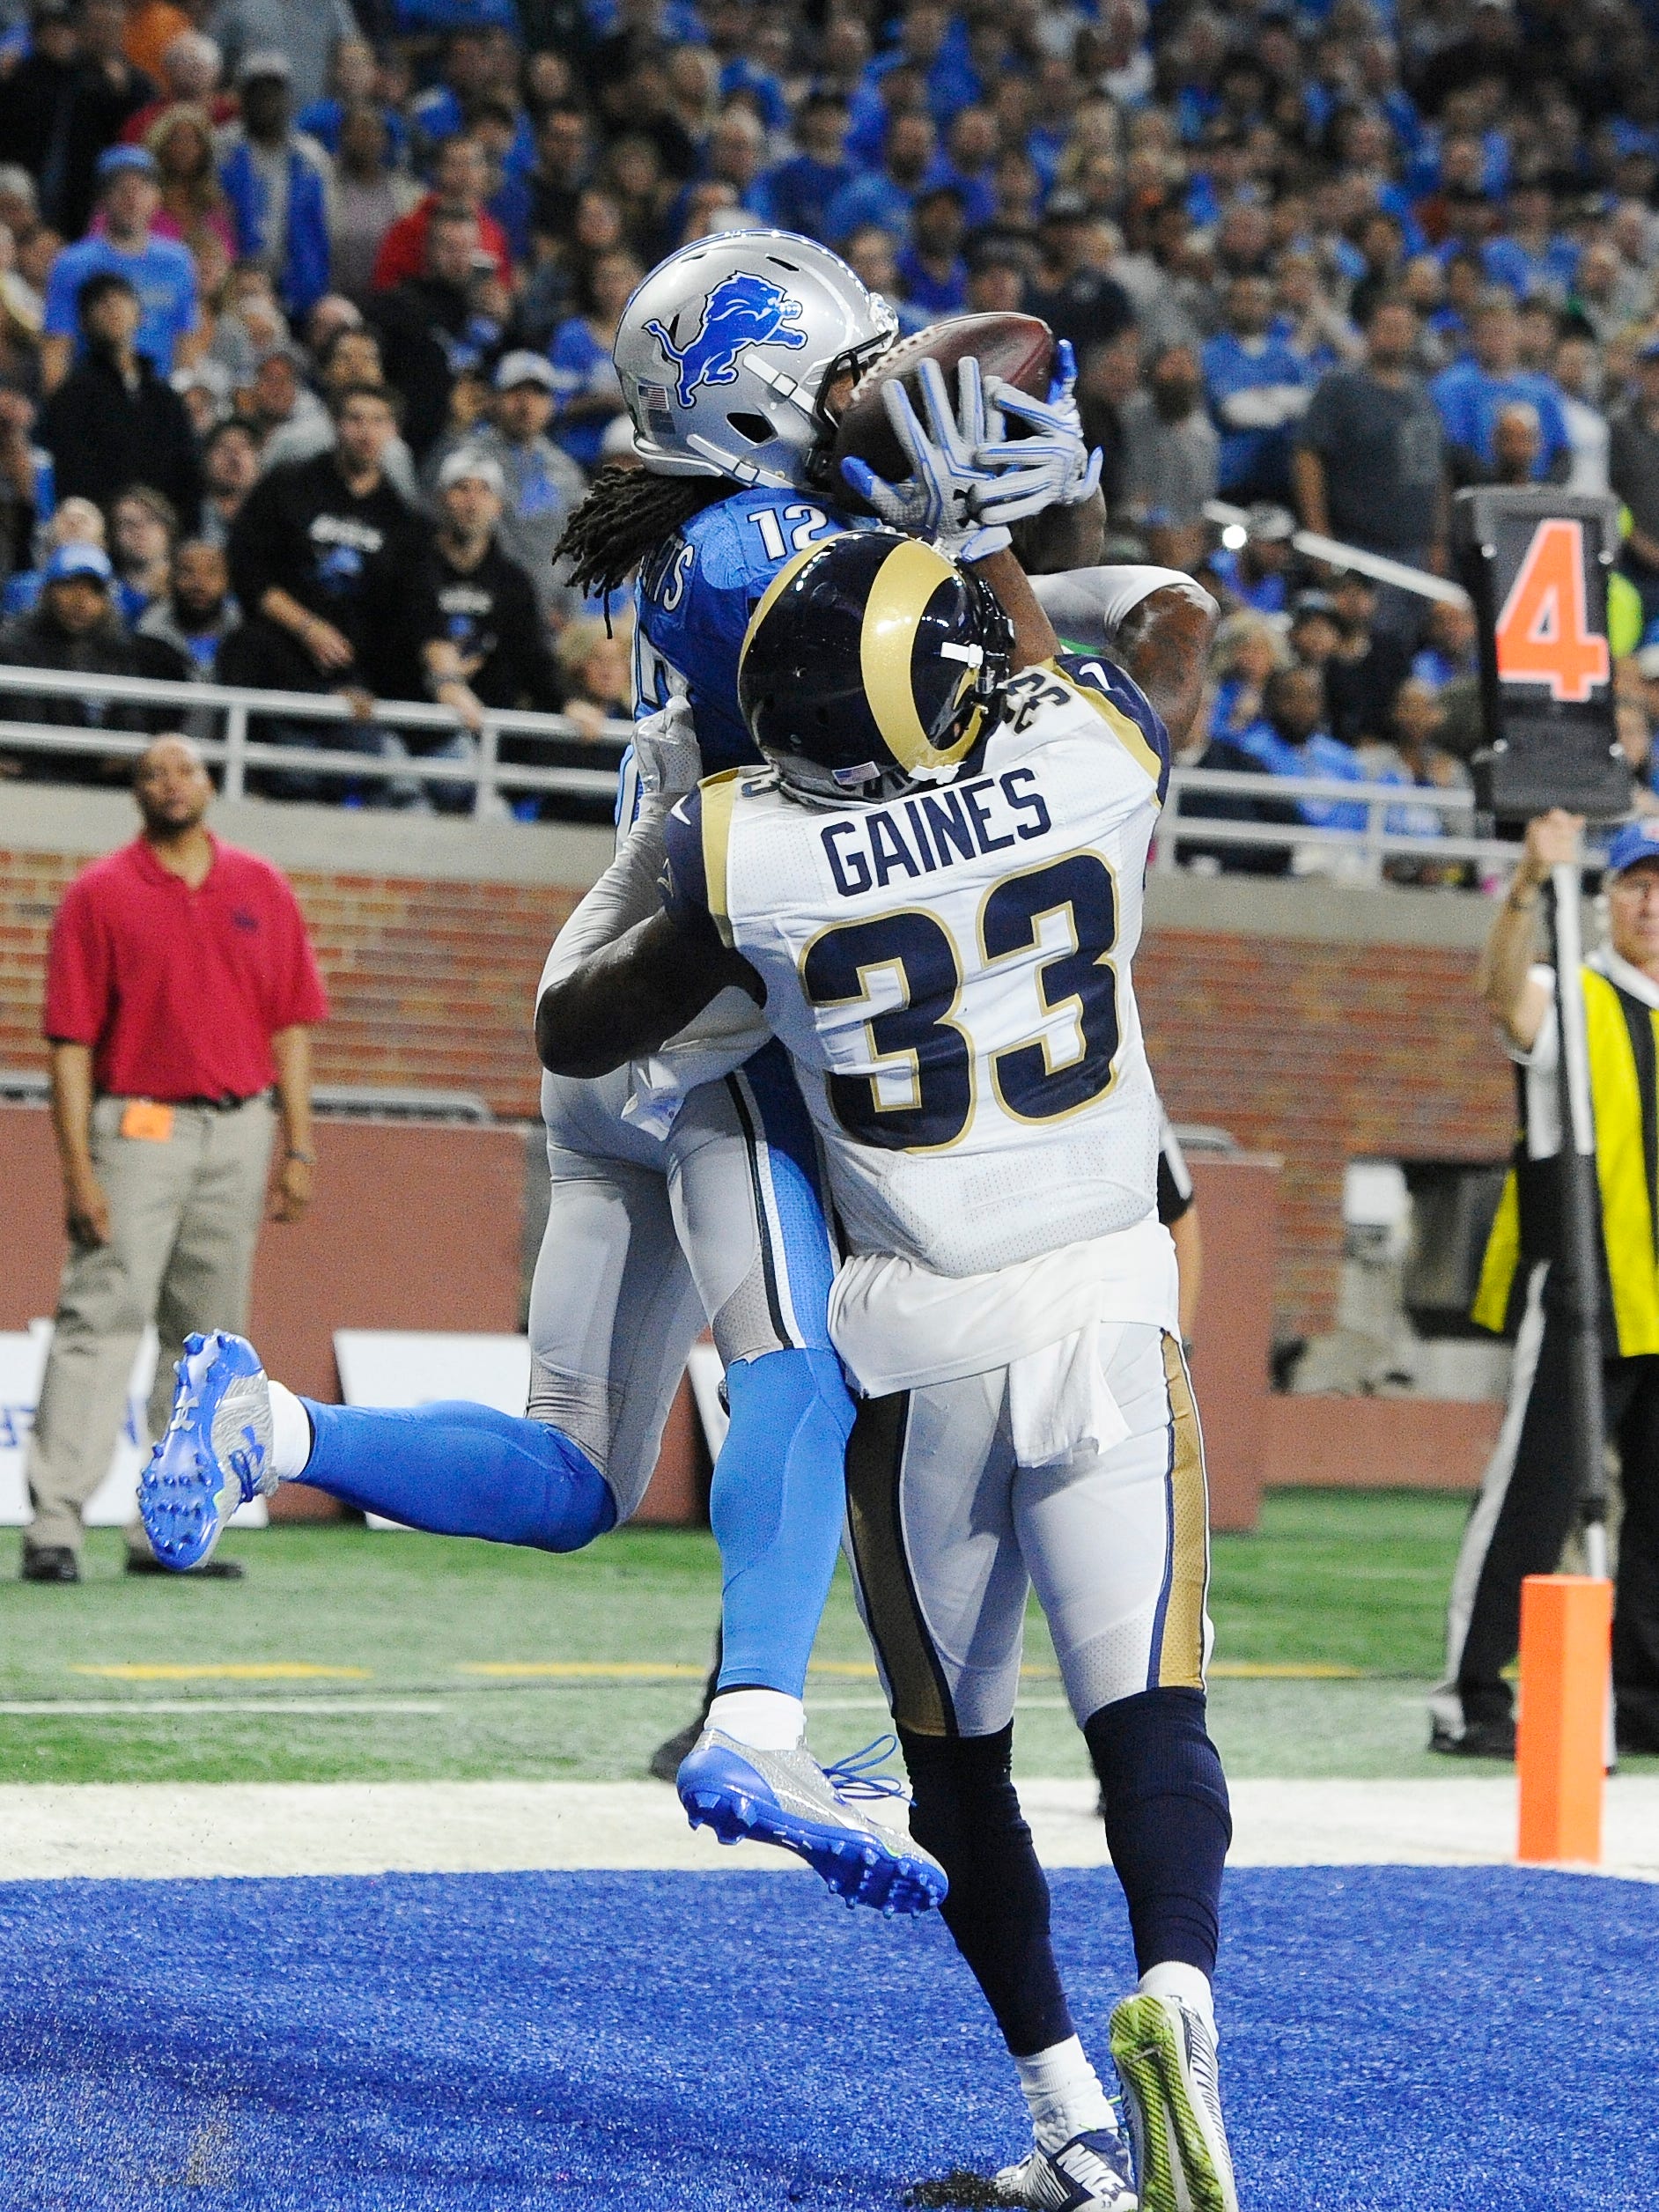 With Rams E.J. Gaines all over him, Lions Andre Roberts pulls in a touchdown reception to tie up the game after the extra point in the second quarter.